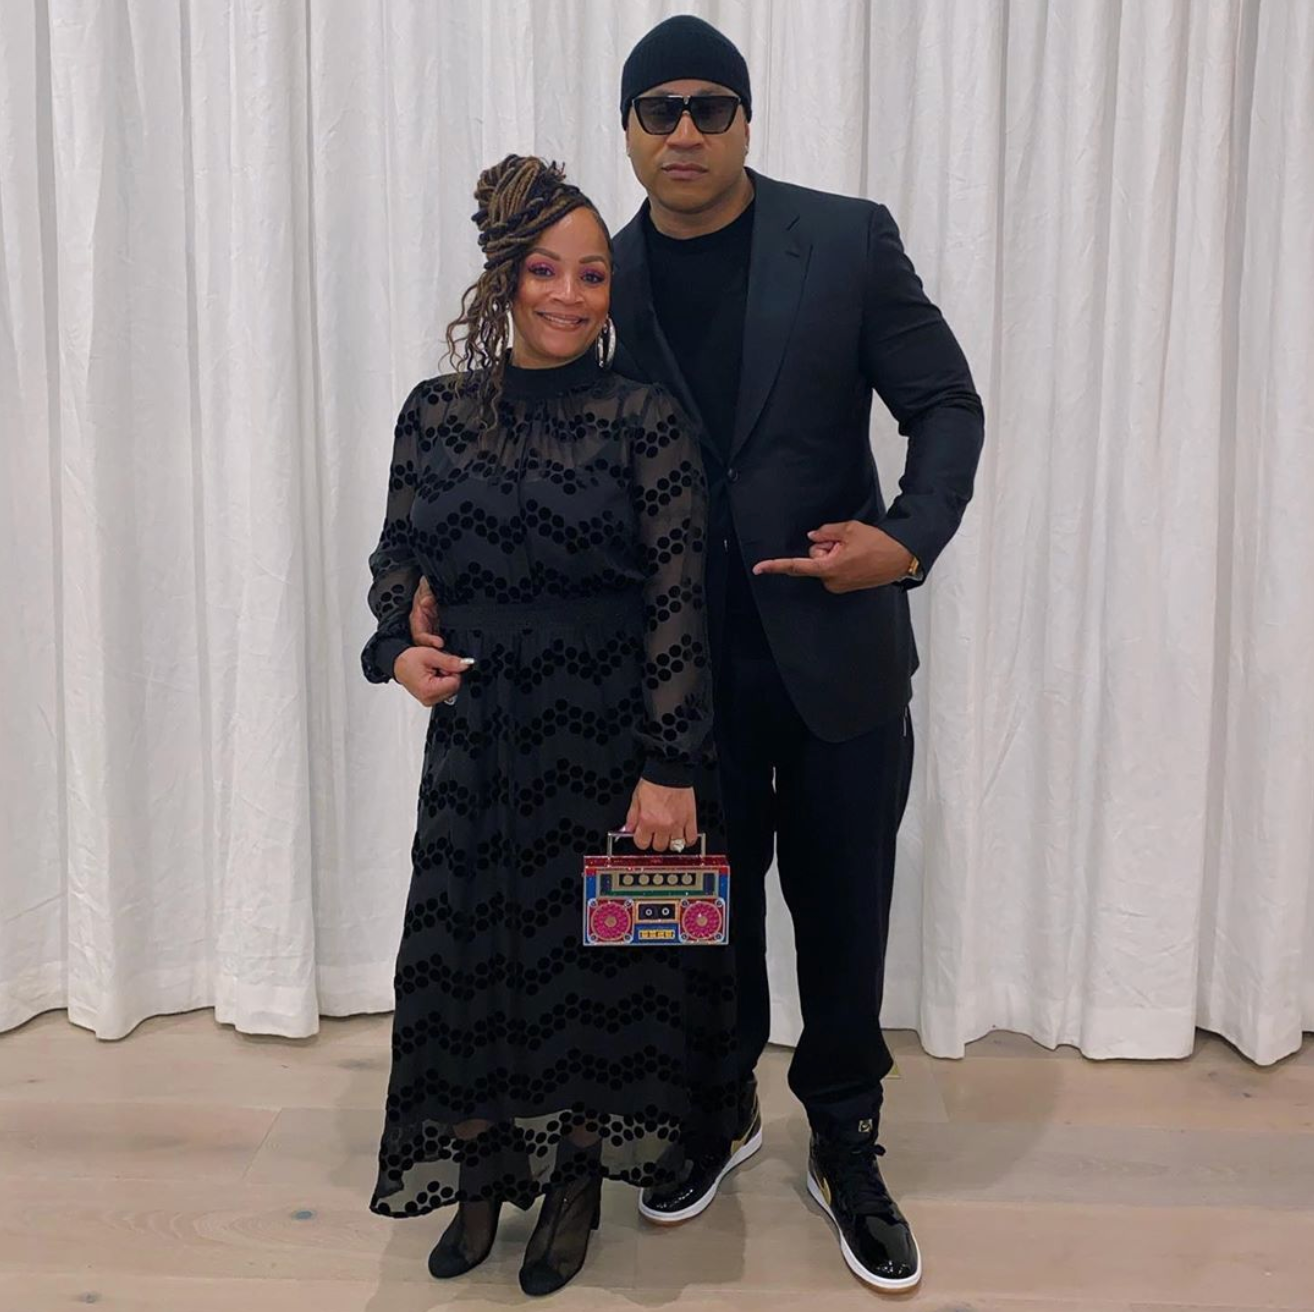 25 Sweet Photos Of LL Cool J and His Wife Simone Looking Madly In Love Through the Years